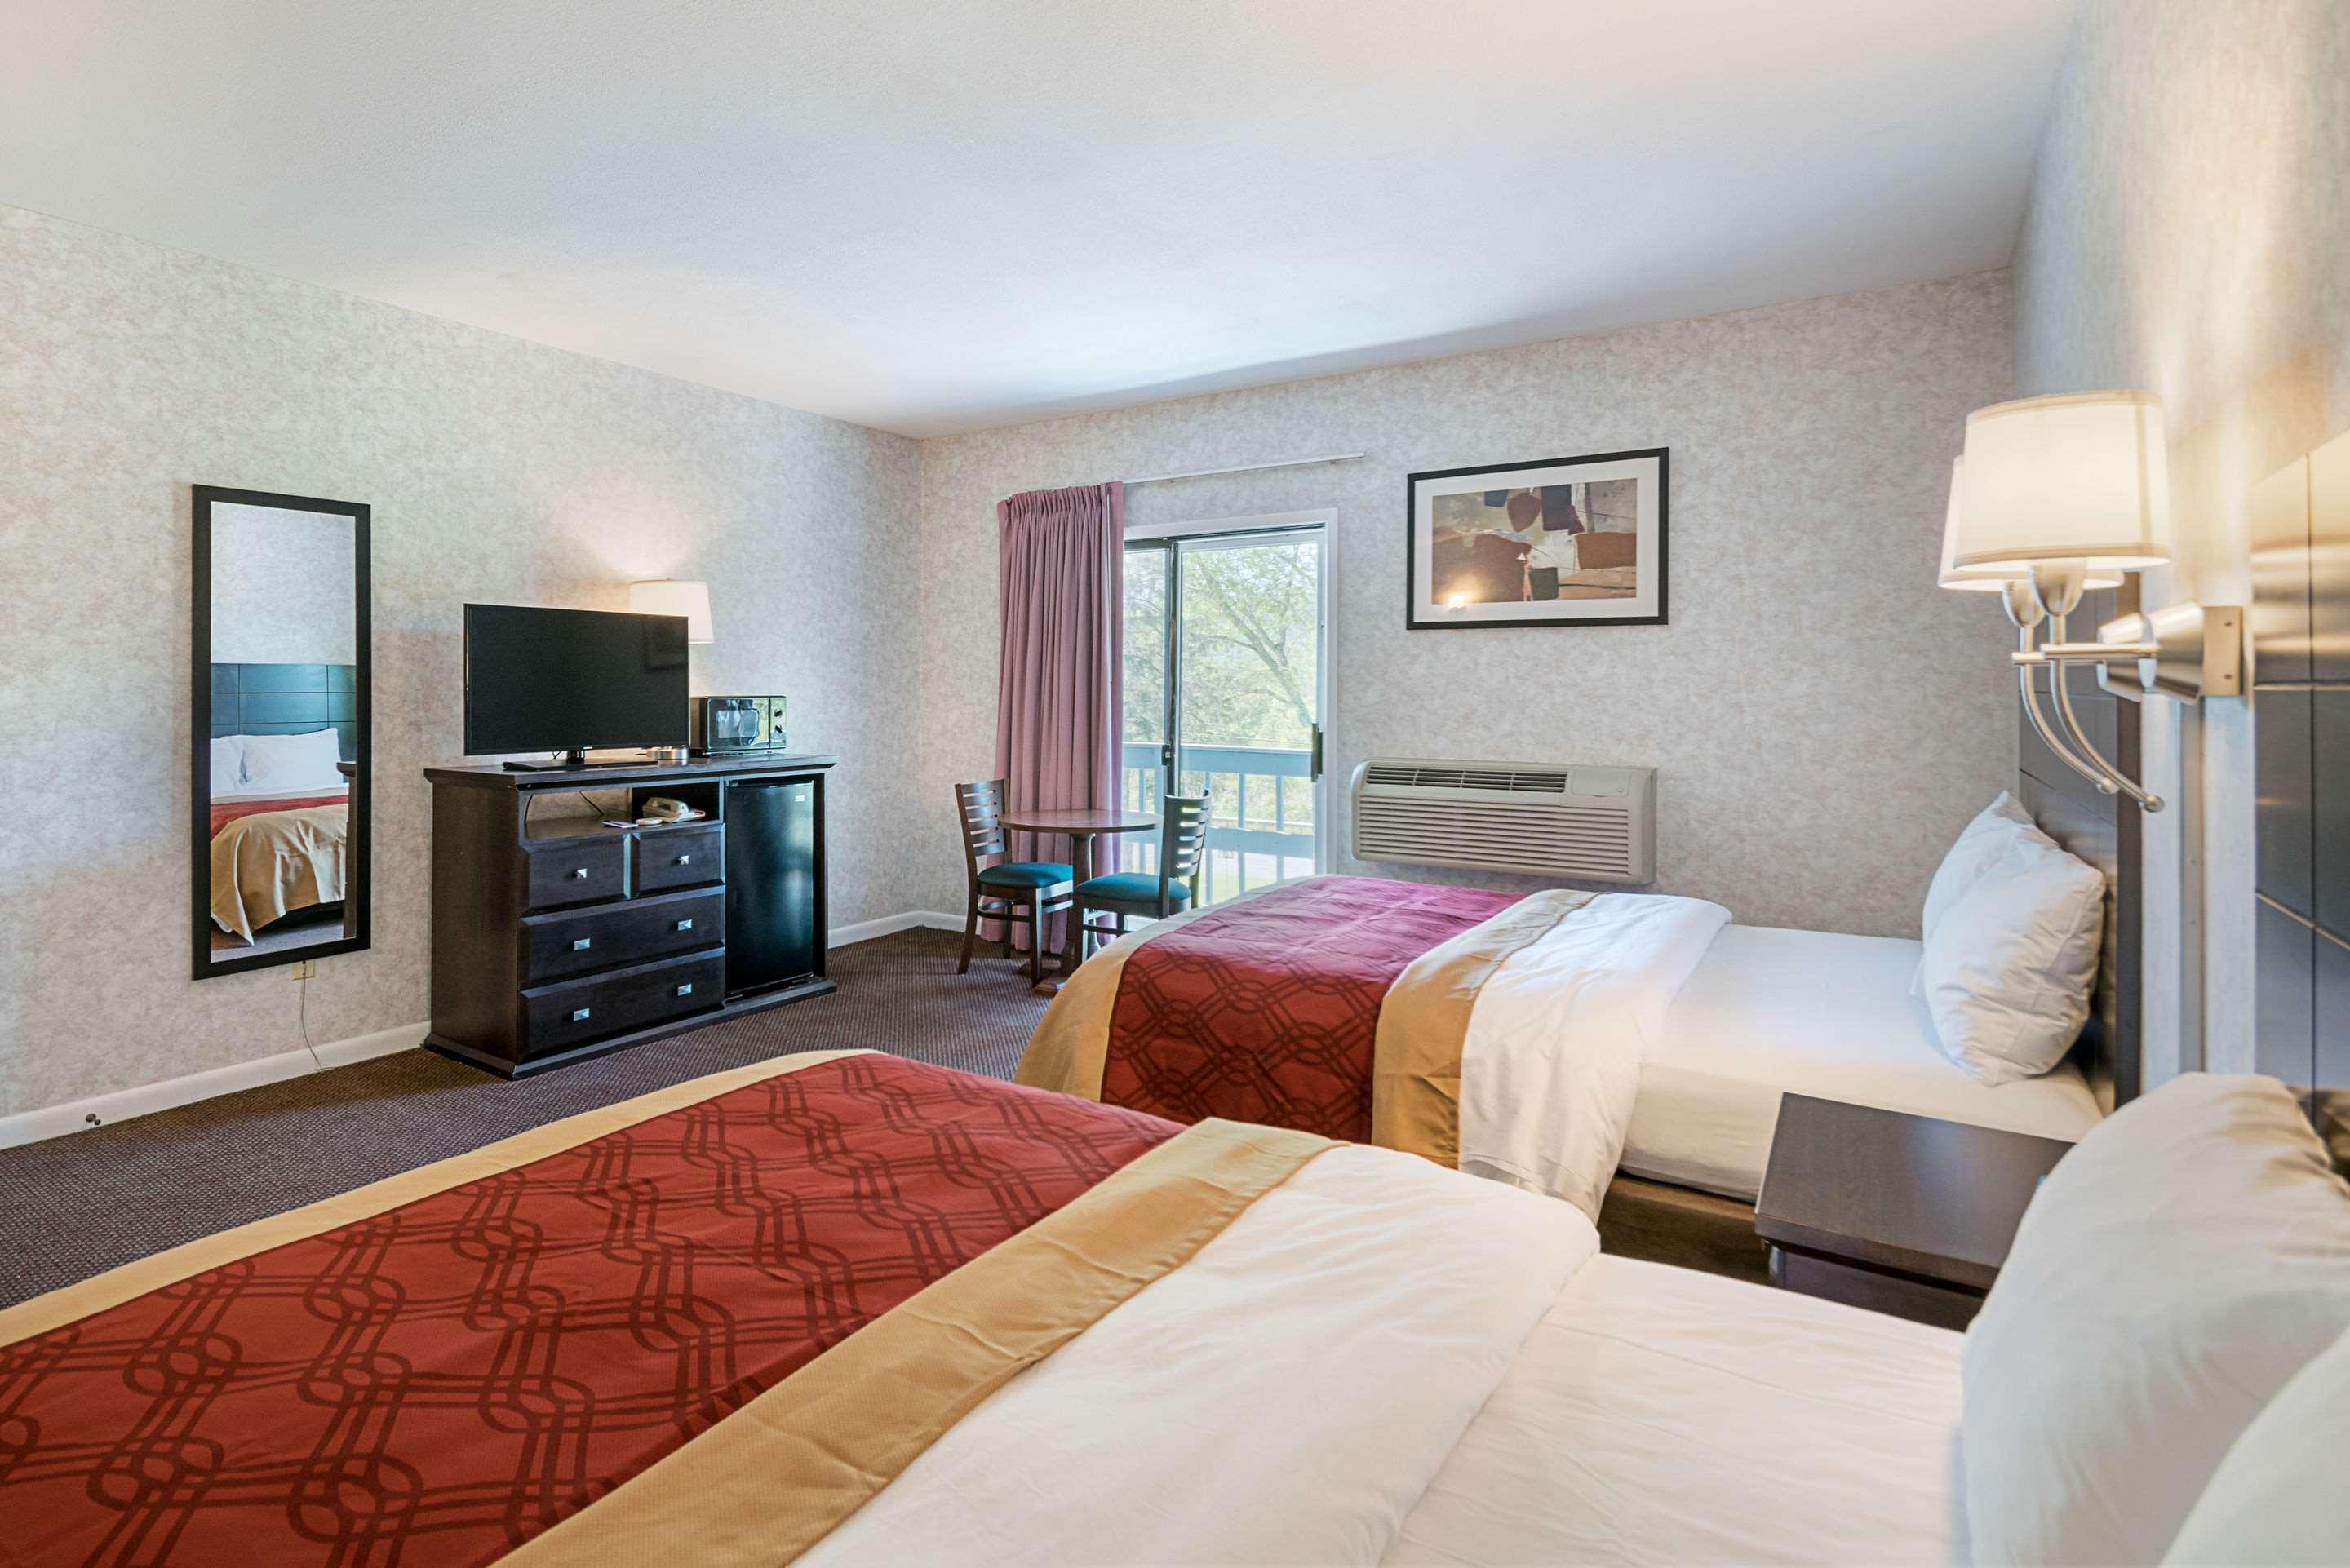 HOTEL ECONO LODGE LEE - GREAT BARRINGTON LEE, MA 2* (United States) - from  US$ 59 | BOOKED